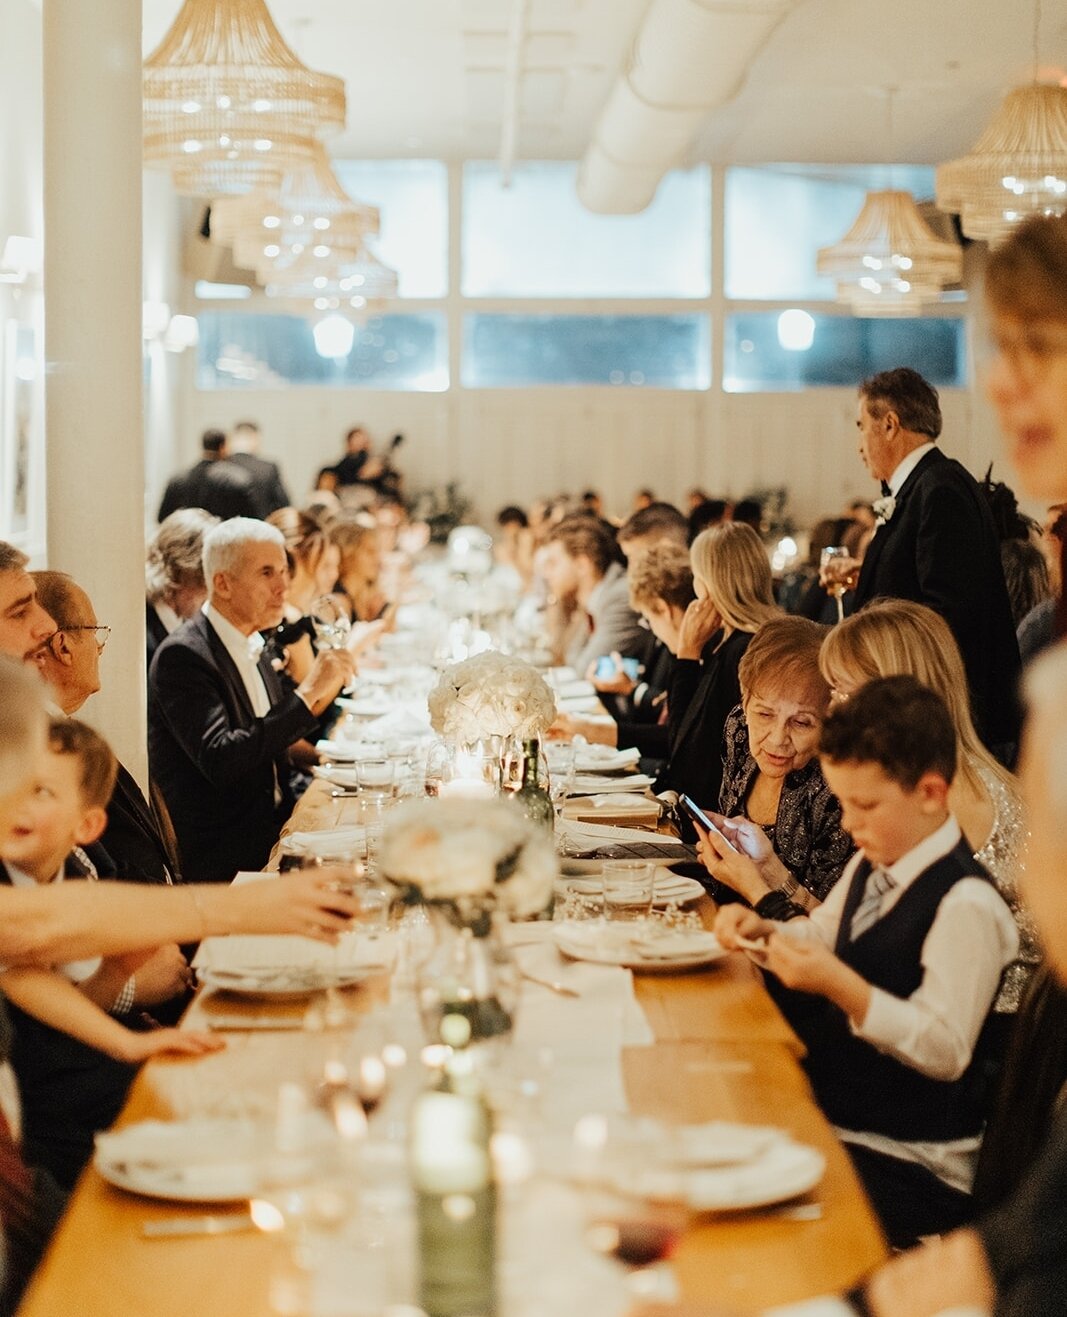 Nothing better than a full house of those we love.⁠
⁠
Photography: @the.lumiere.collective